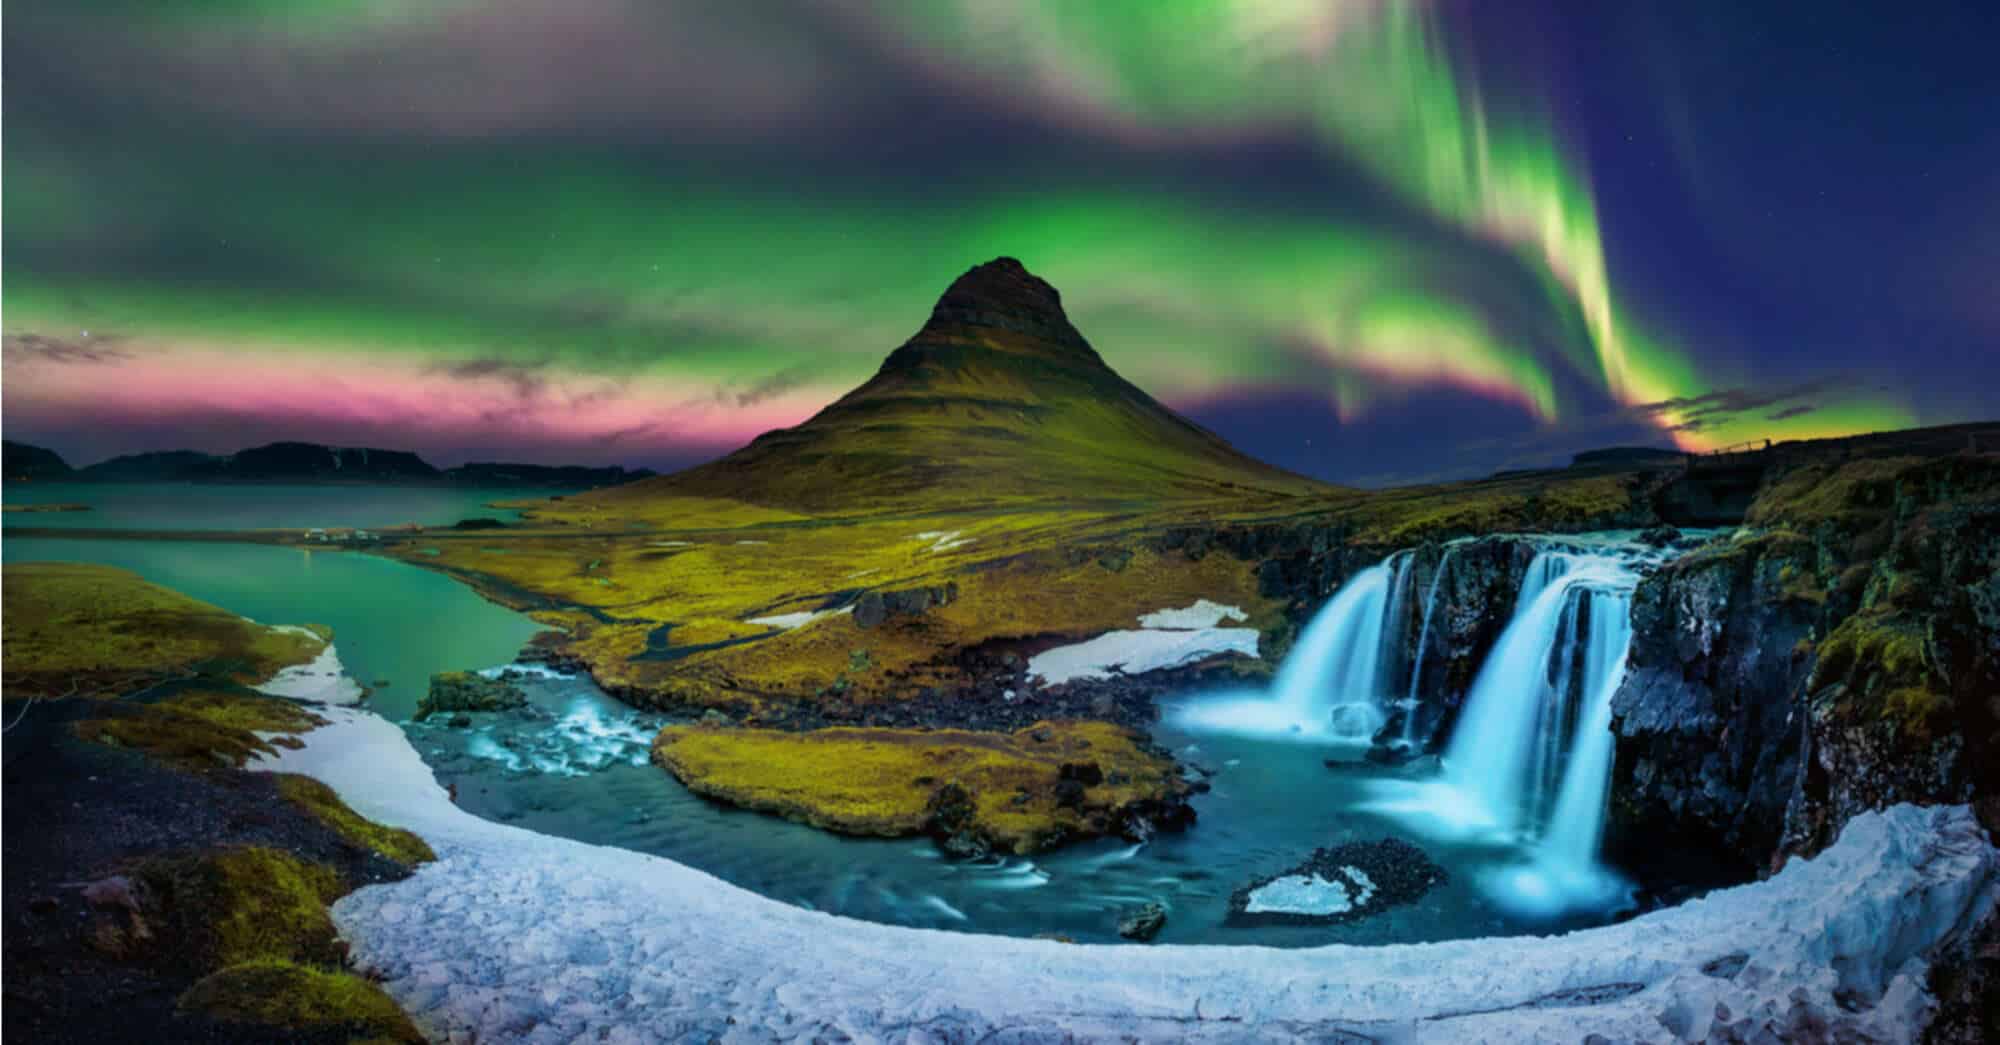 scenery in Iceland with waterfalls and the Northern Lights